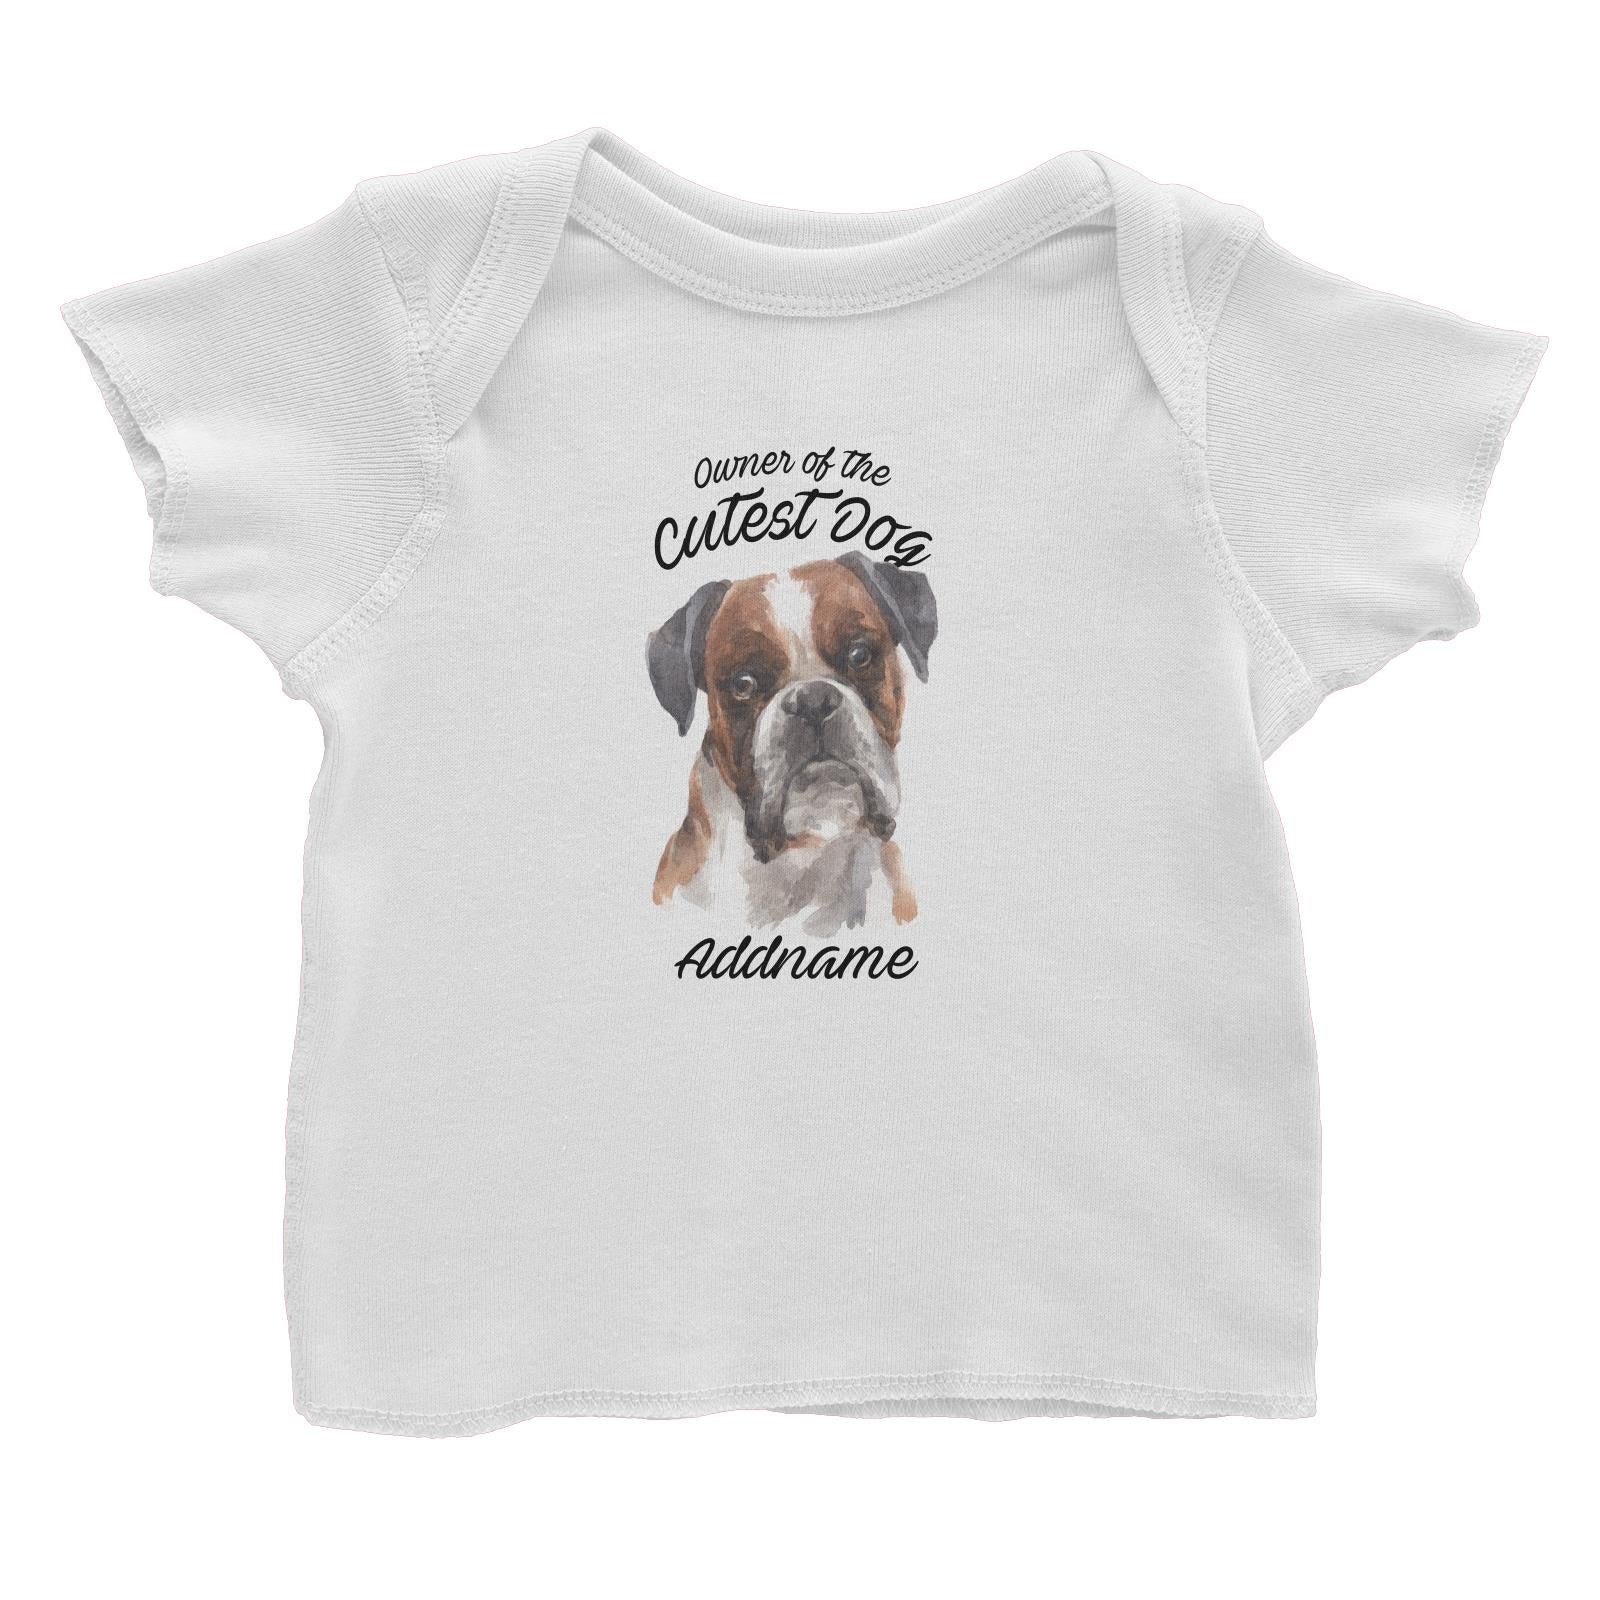 Watercolor Dog Owner Of The Cutest Dog Boxer Black Ears Addname Baby T-Shirt